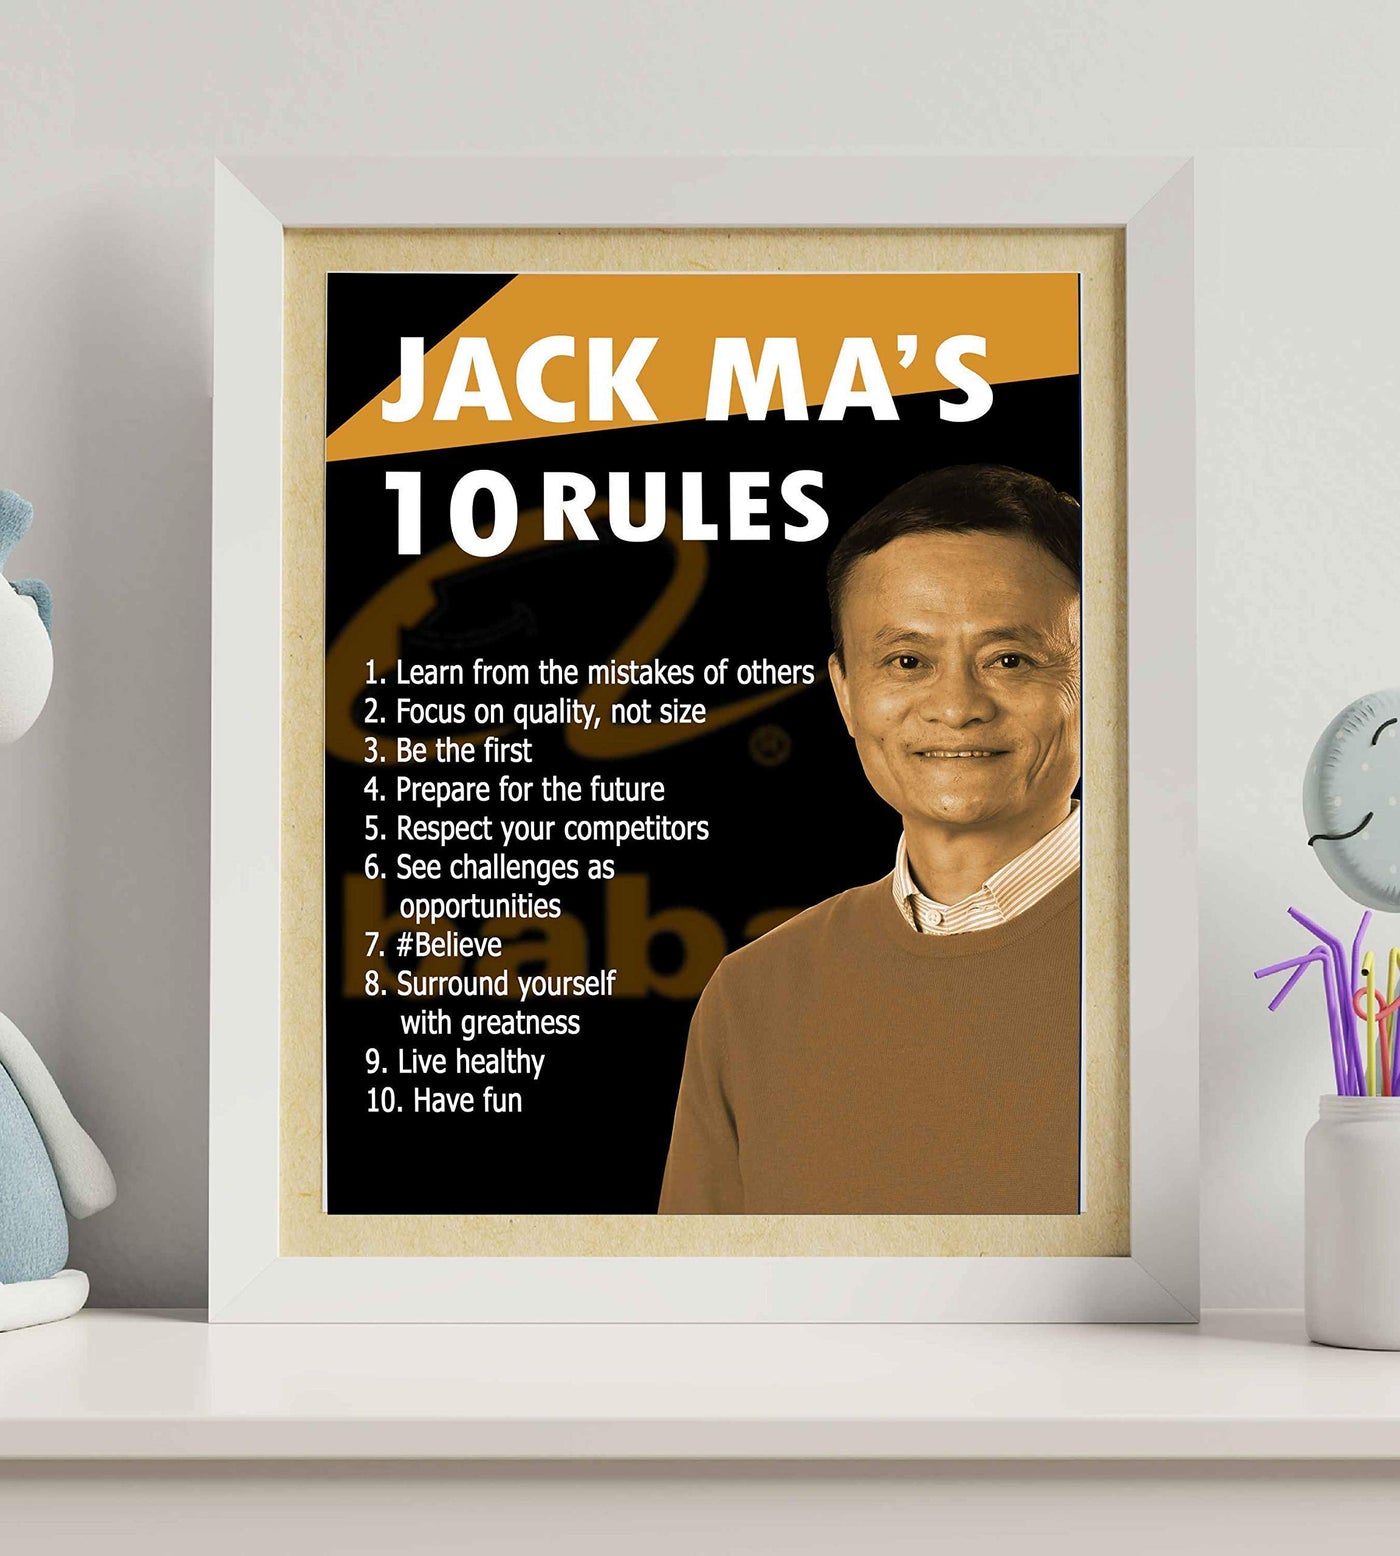 Jack Ma's Ten Rules -Inspirational Quotes Wall Art - 8 x 10" Modern Typographic Poster Print w/Silhouette Image-Ready to Frame. Positive Home-Office-Classroom Decor! Great Motivational Gift!